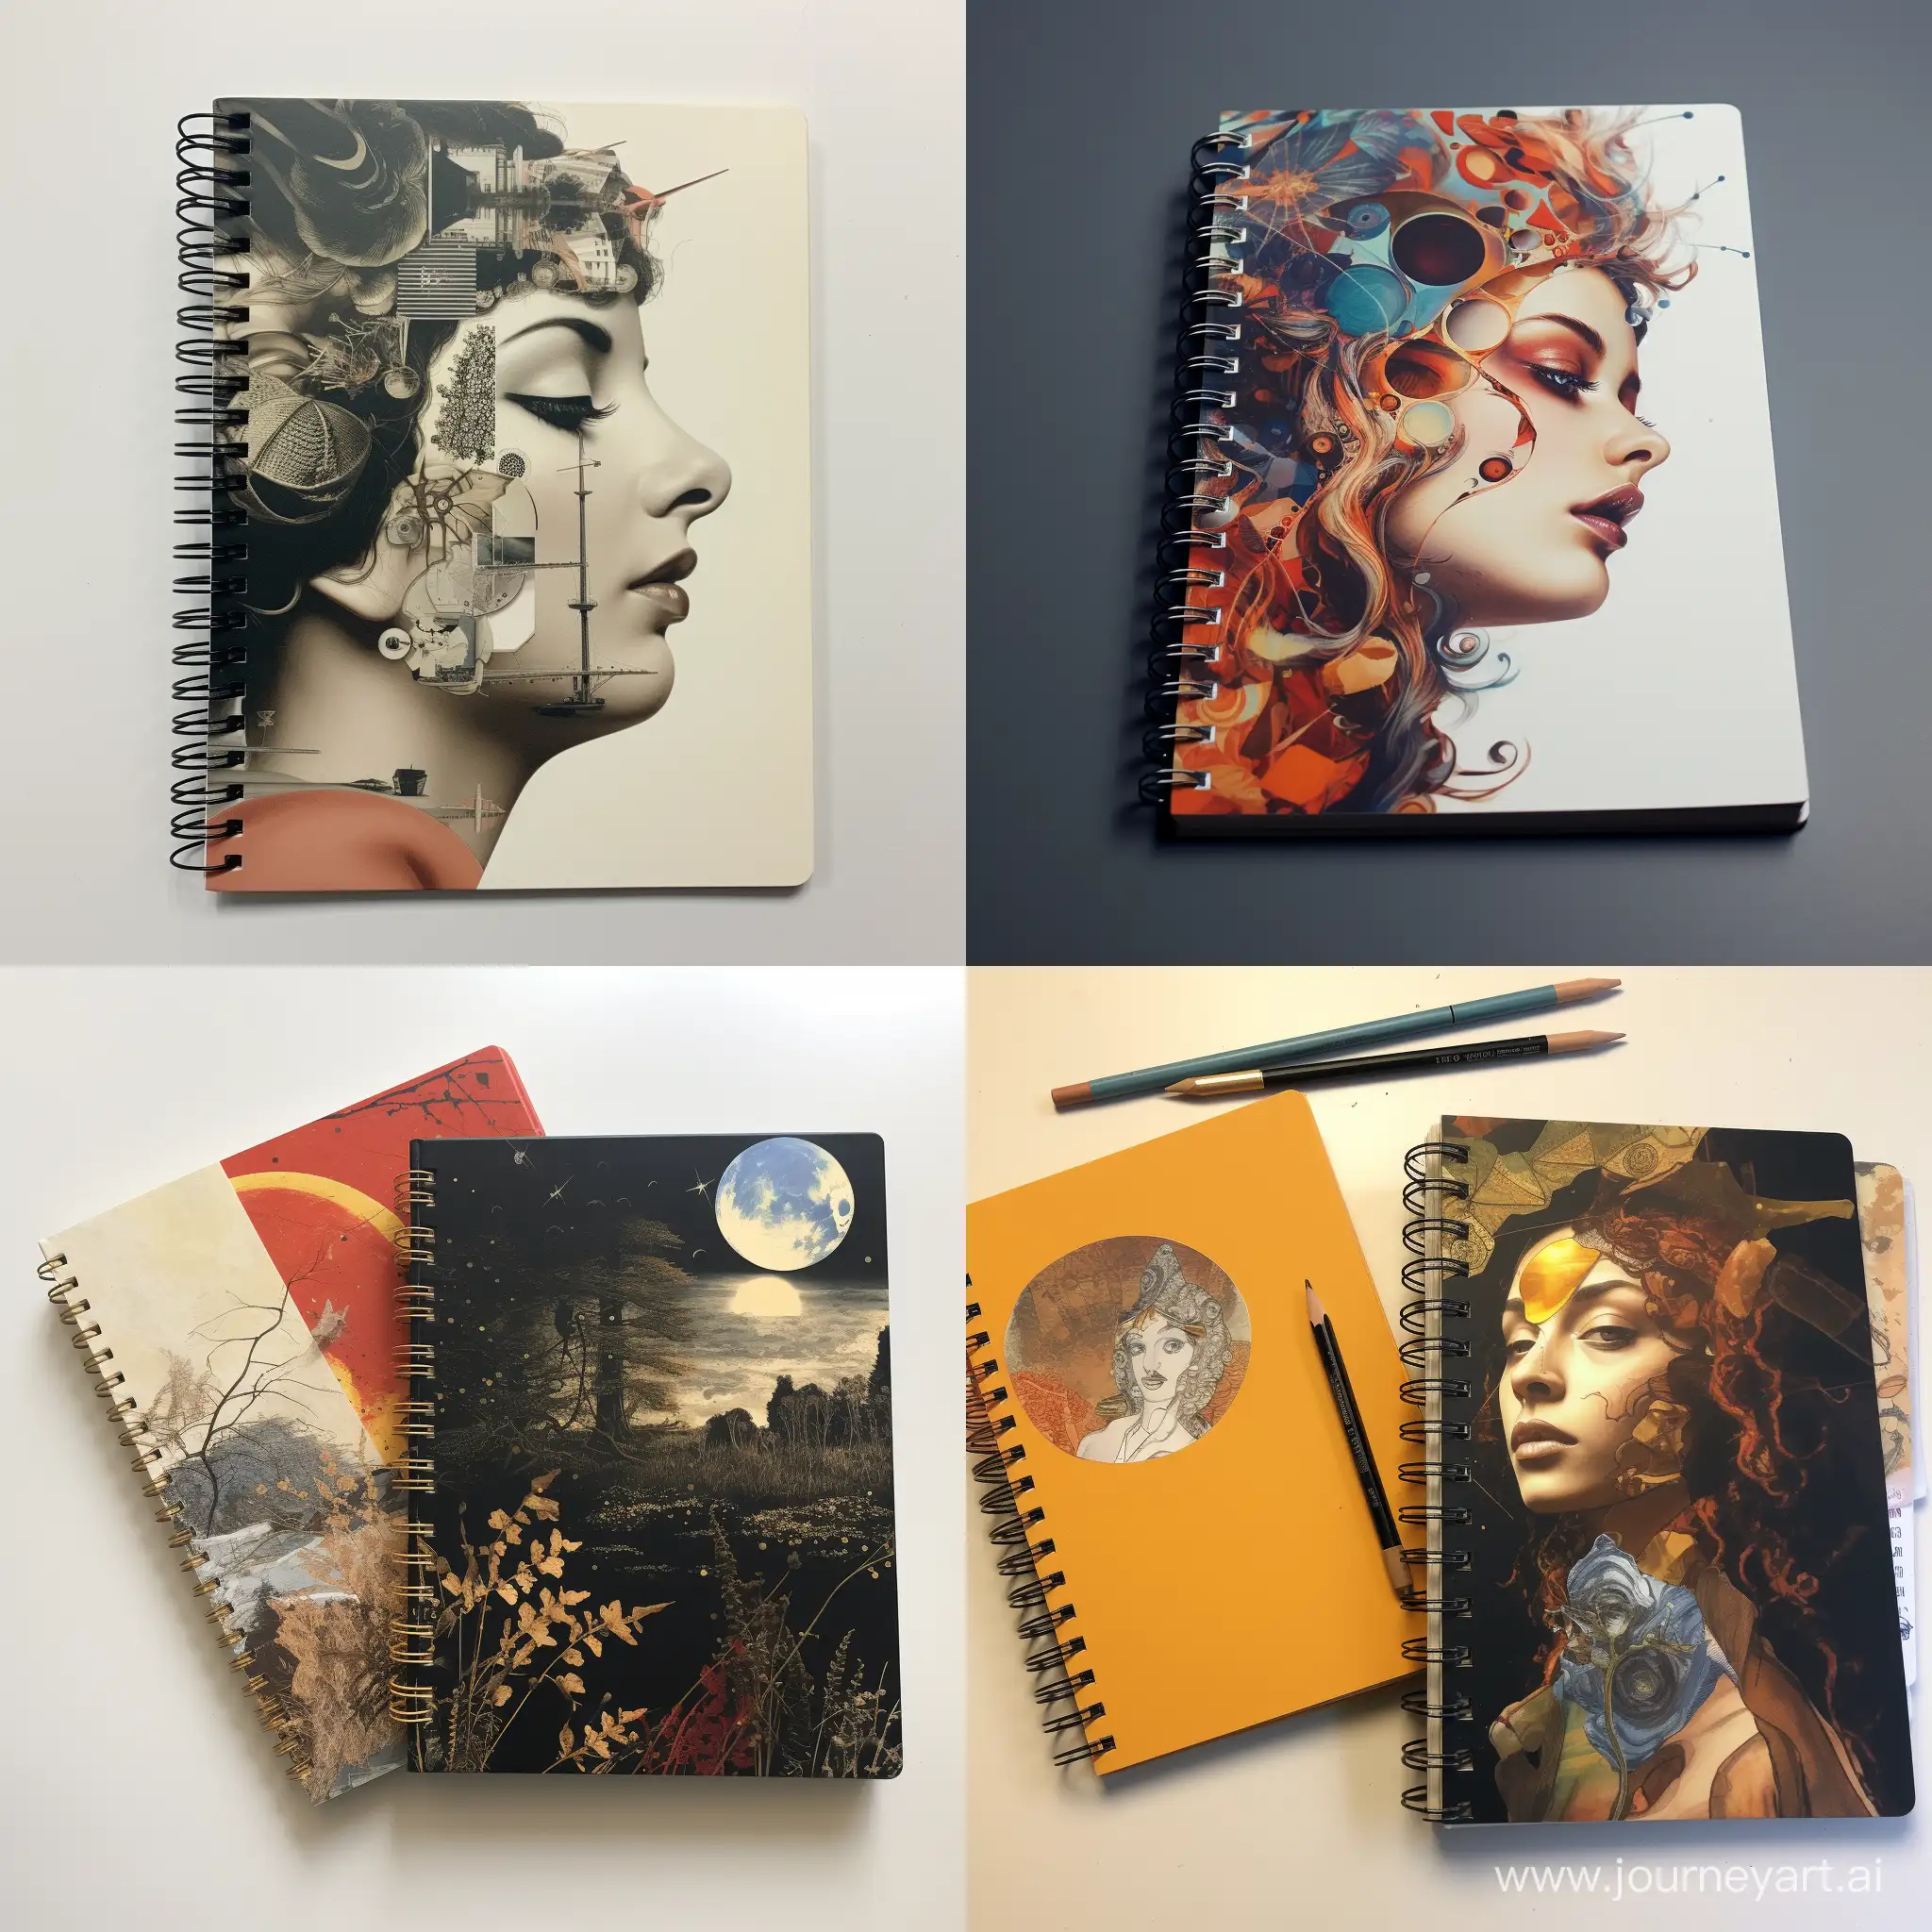 Colorful-Notebooks-Arranged-in-11-Aspect-Ratio-Image-AR-11-49971